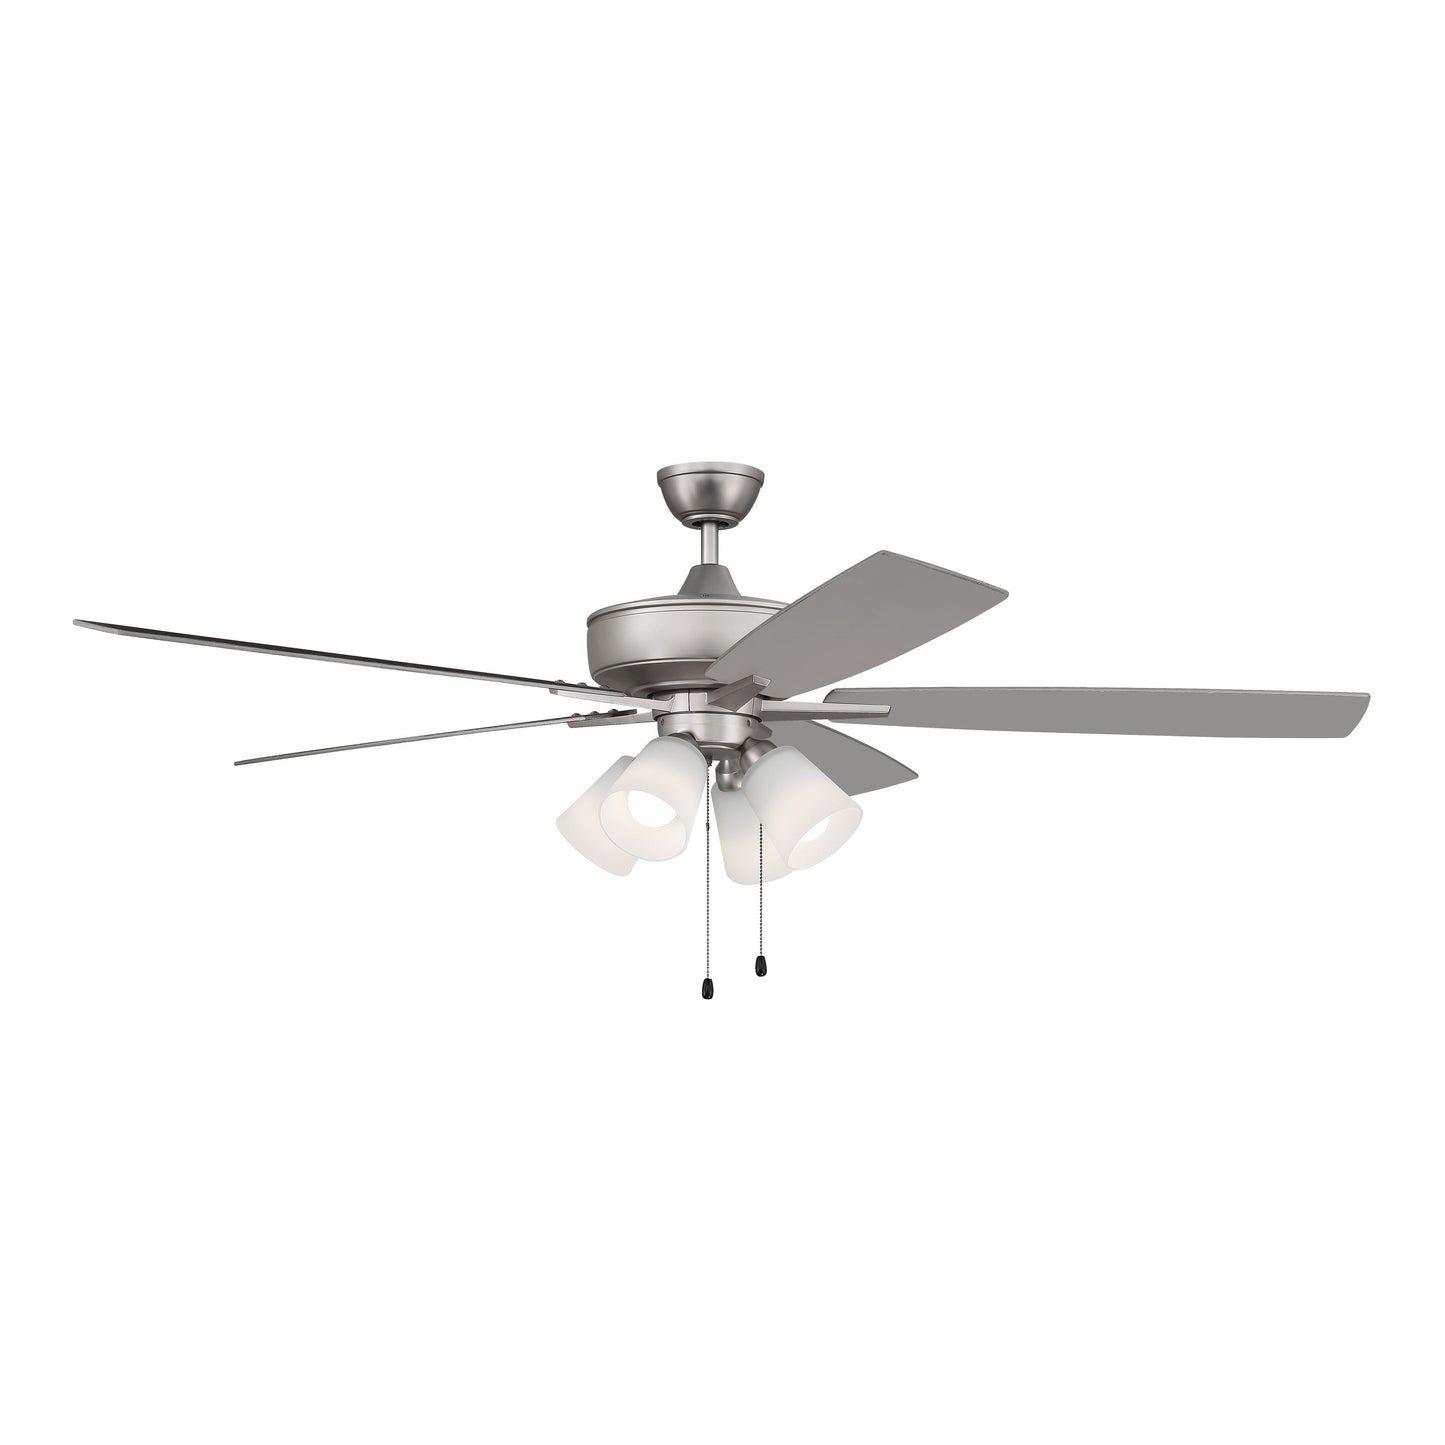 S114BN5-60BNGW - Super Pro 114 60" 5 Blade Ceiling Fan with Light Kit - Pull Chain - Brushed Satin N